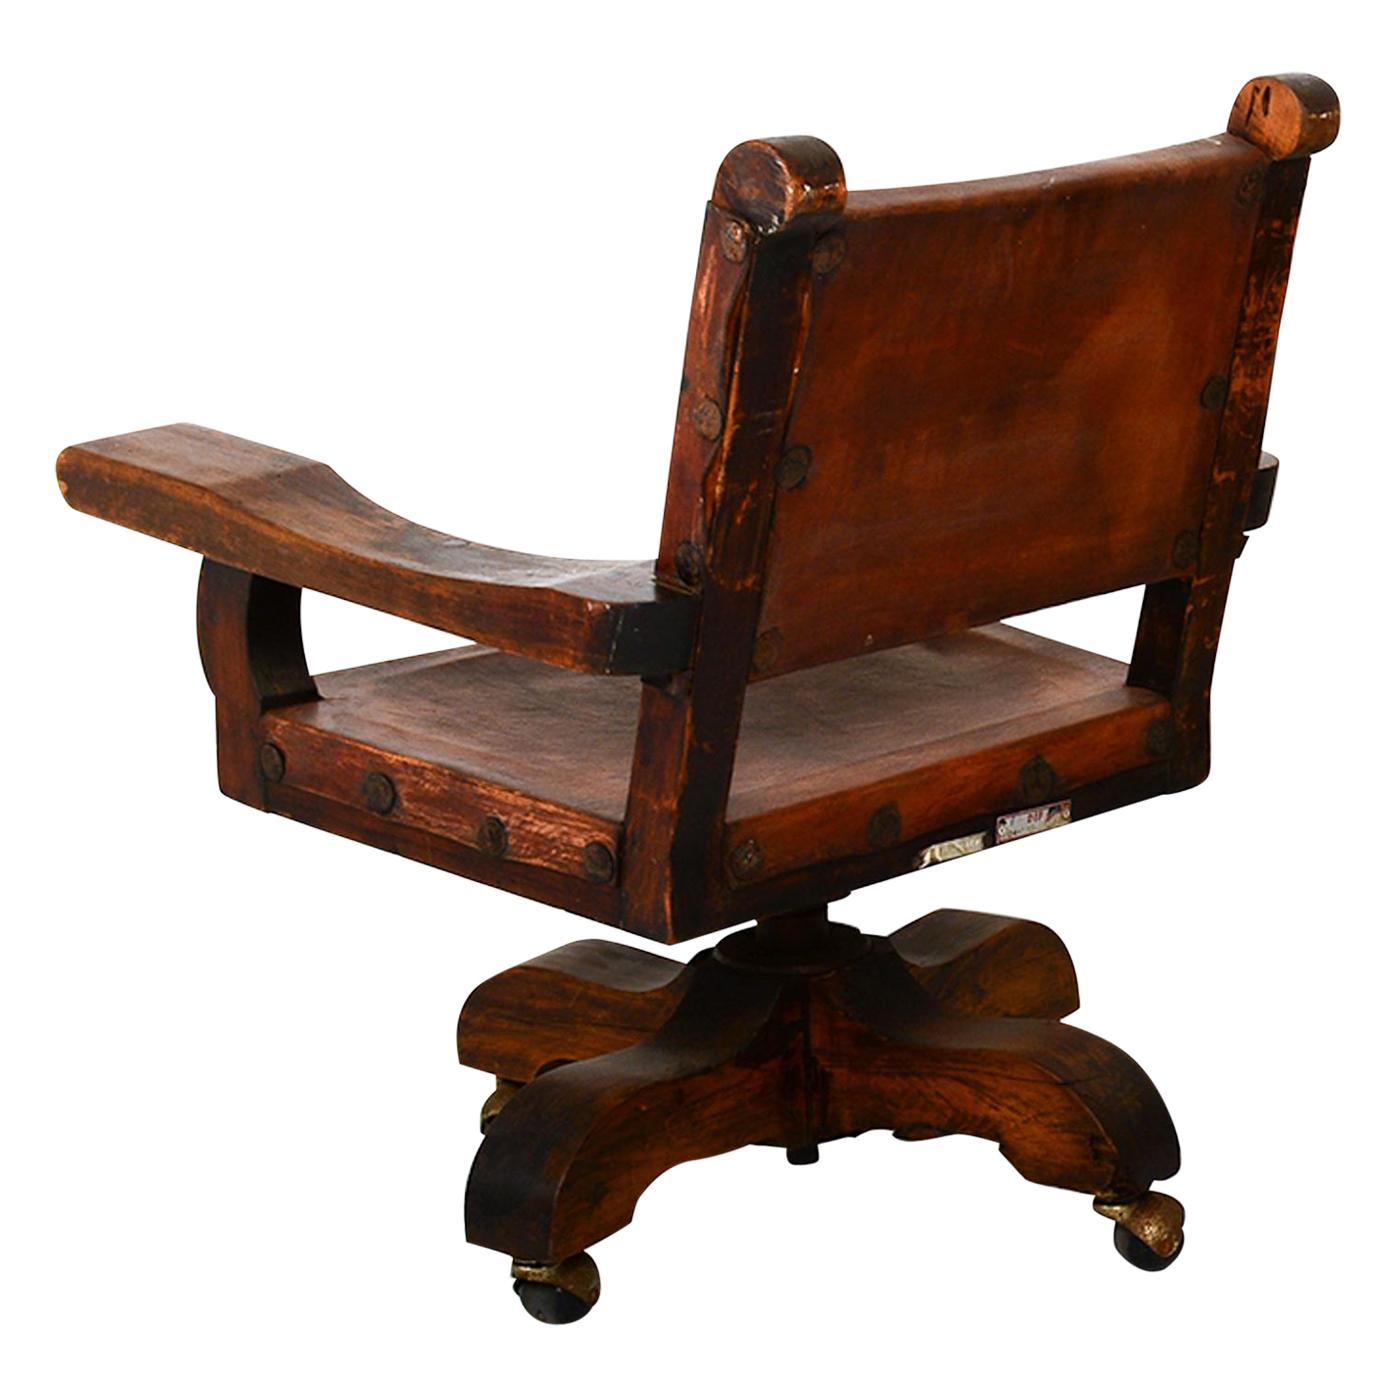 Office Chair
Vintage Mexican Mahogany and Leather OFFICE CHAIR Spanish Colonial Revival office chair saddle leather with original nails. Comfortable armrest. Height is adjustable. Vintage Mid Century Mexican Mahogany office chair on casters.